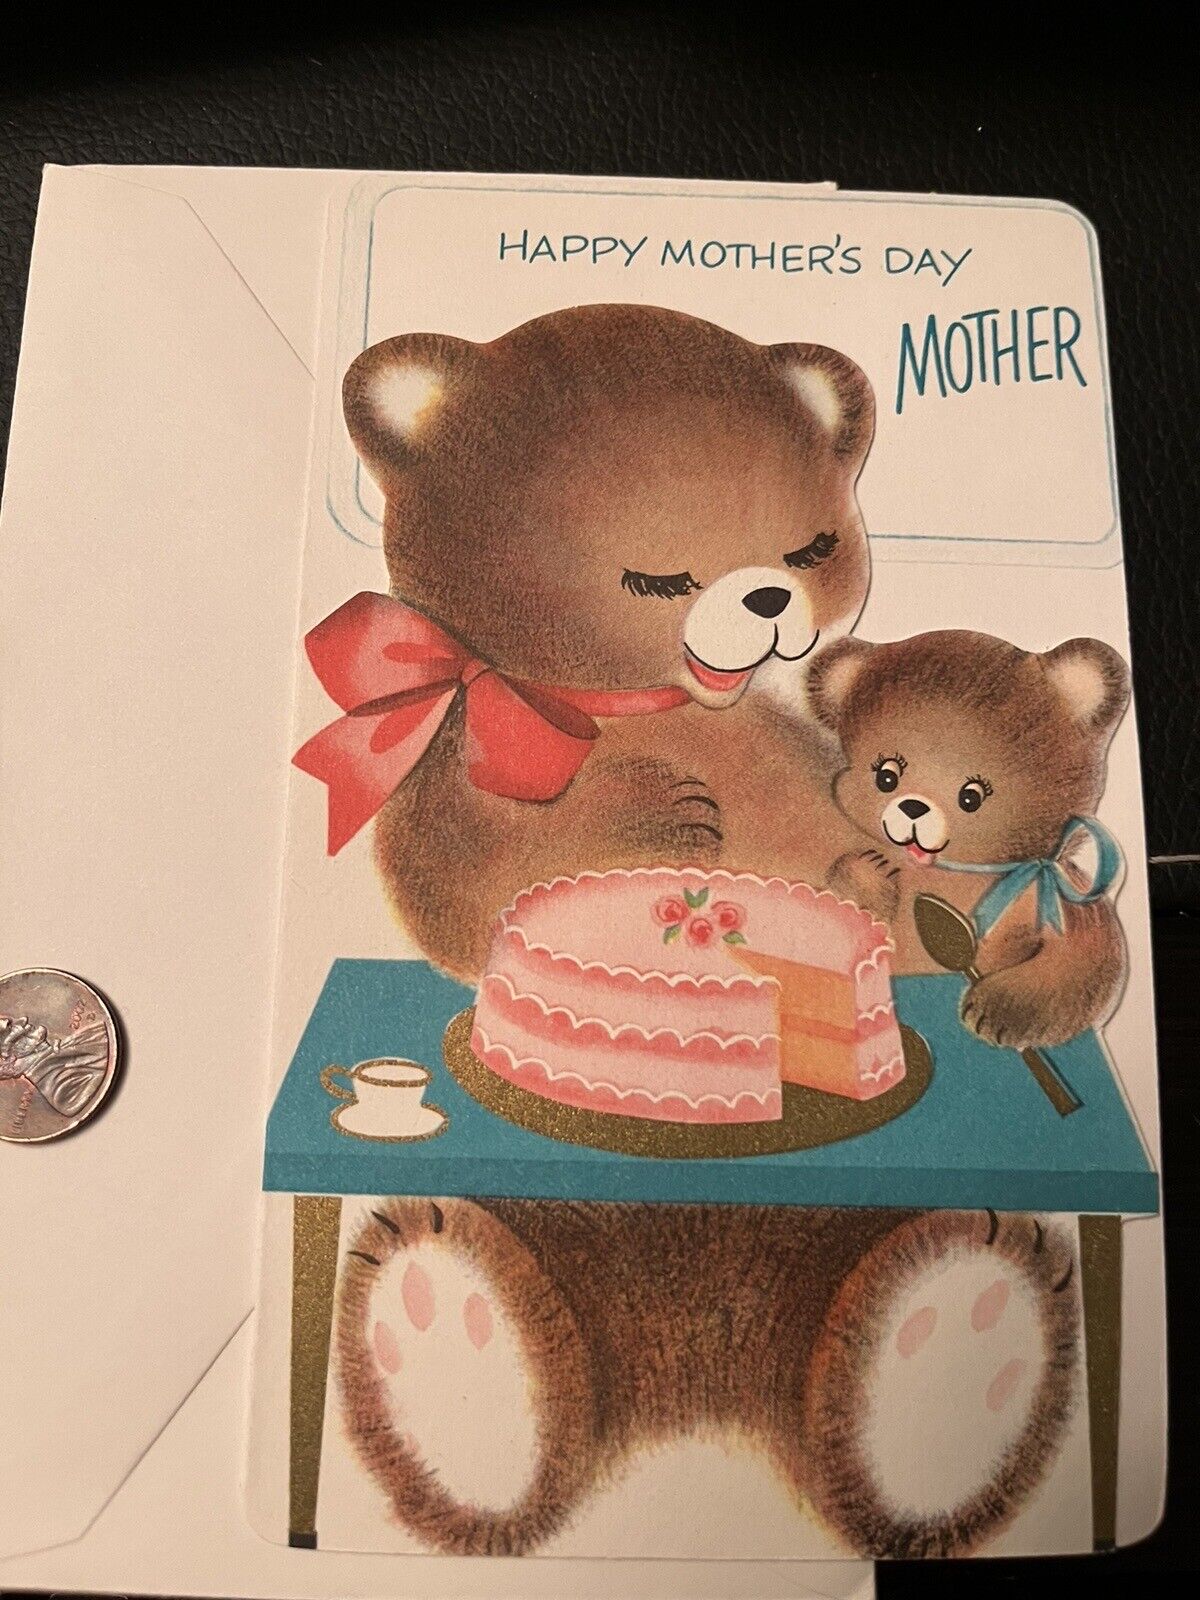 Buzza Cardozo Vintage Mothers Day Greeting Card Unused In Mint Condition For Age